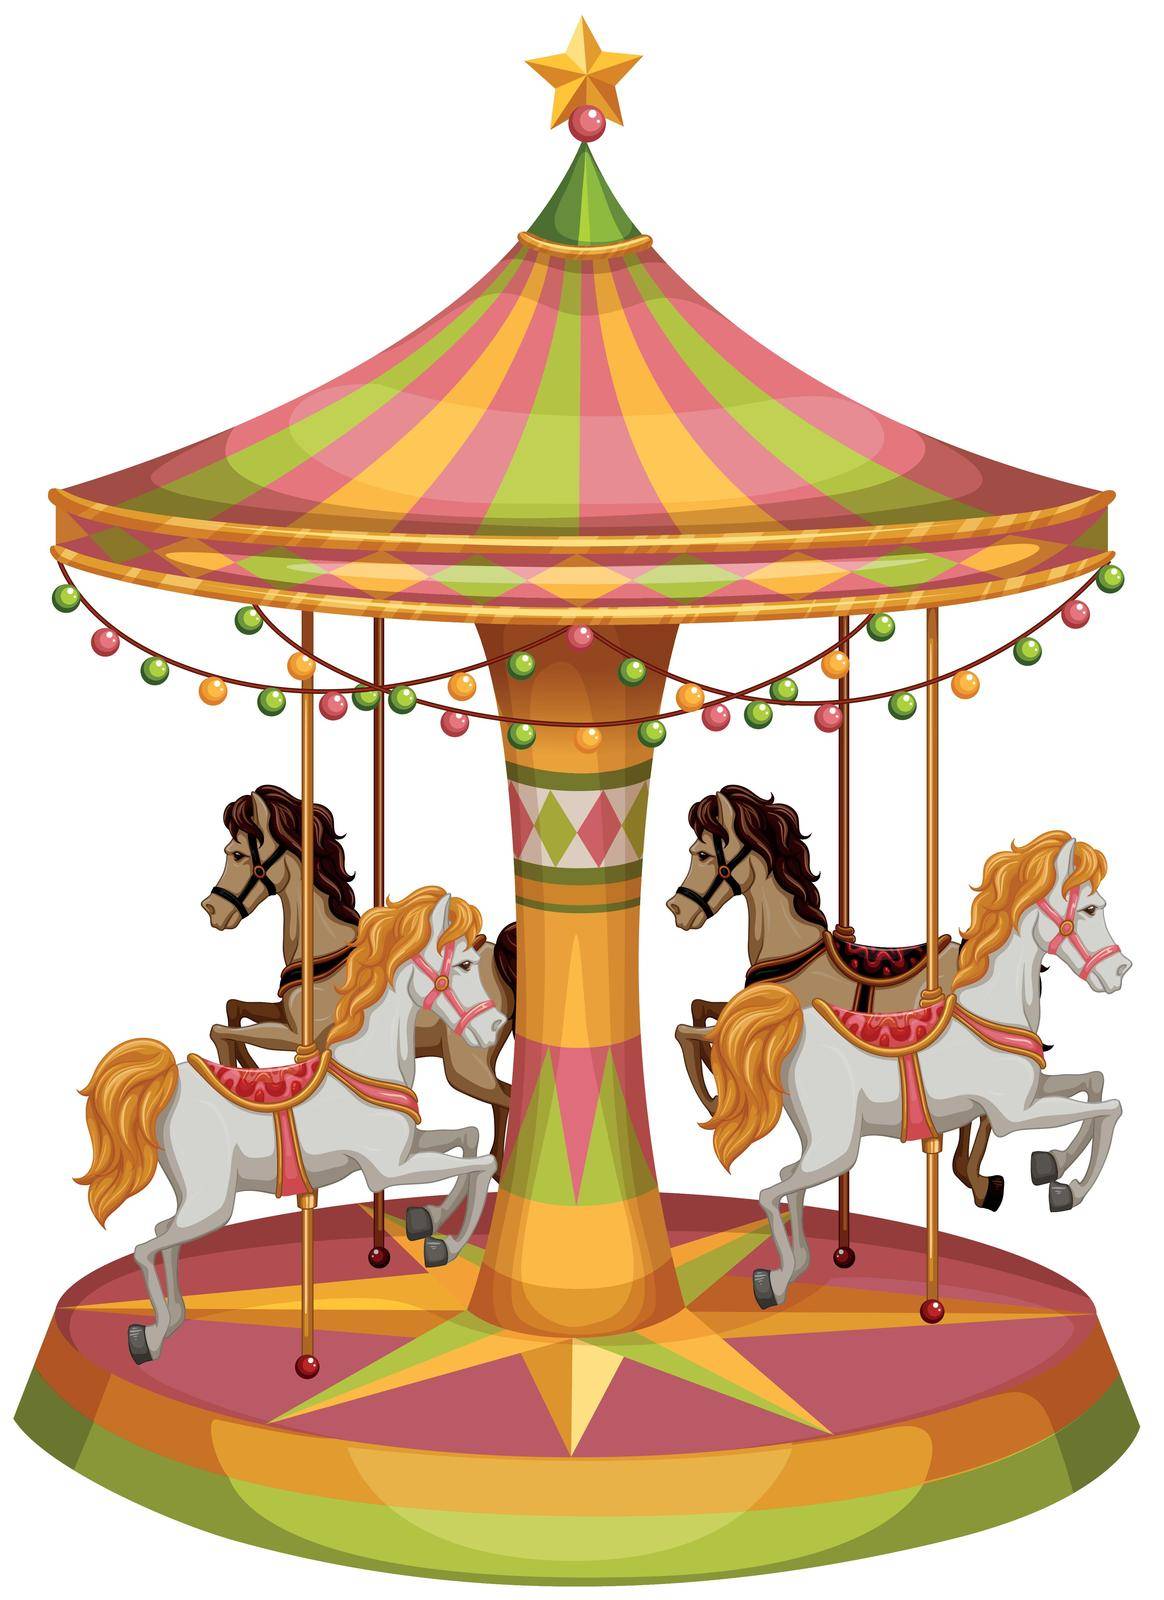 A merry-go-round horse ride by iimages